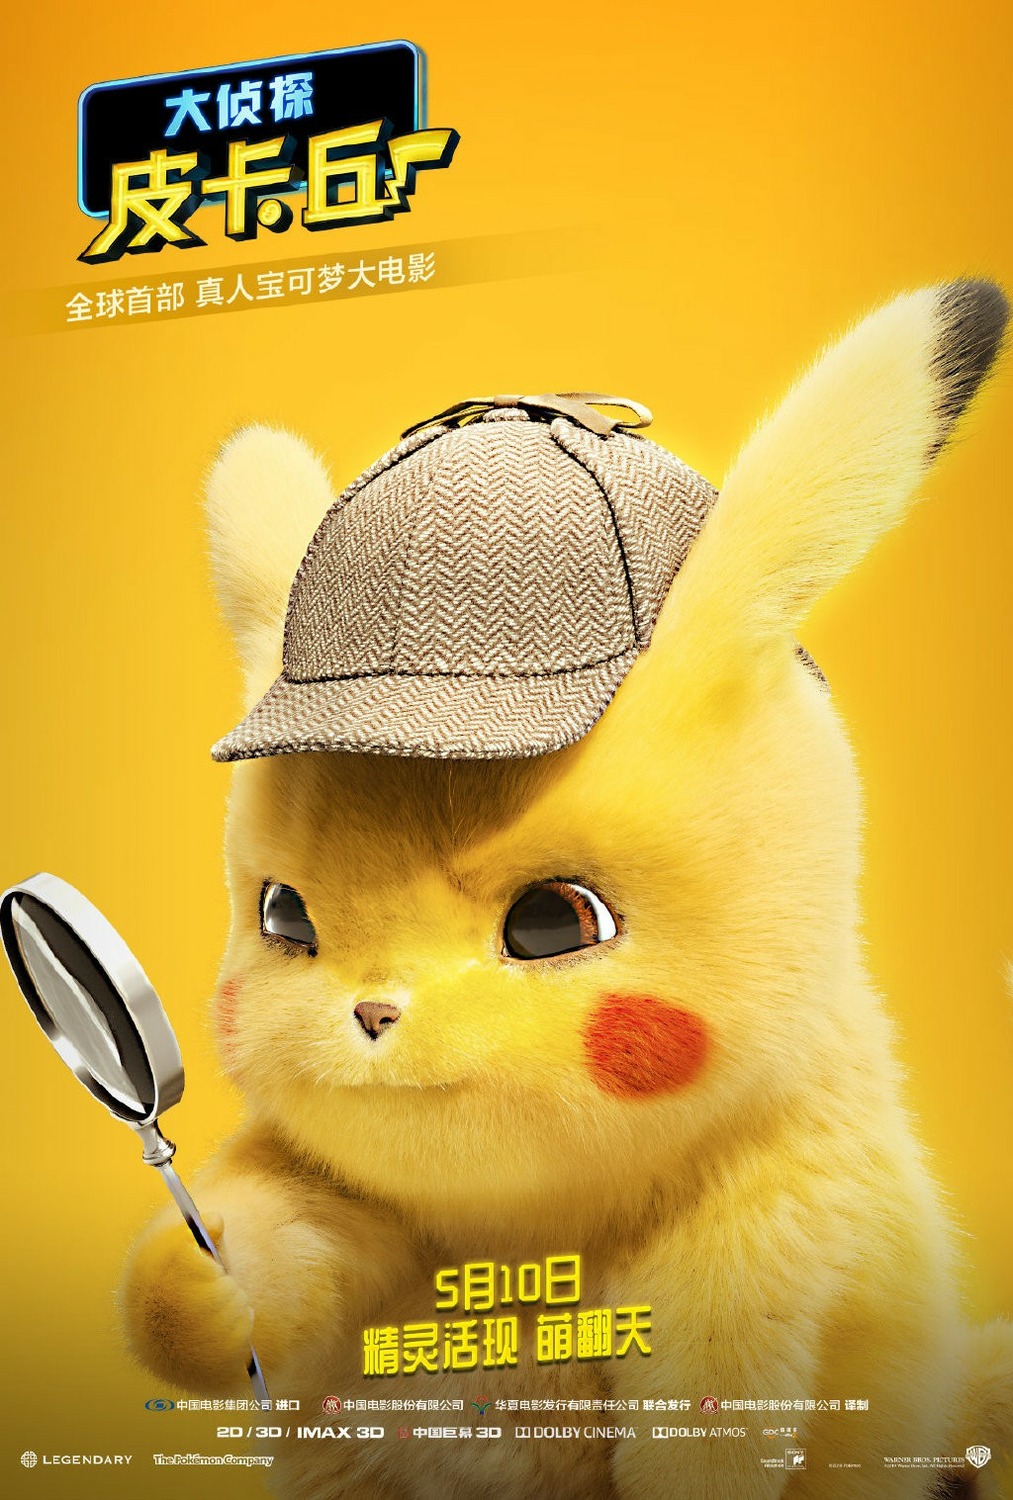 Extra Large Movie Poster Image for Pokémon Detective Pikachu (#13 of 26)